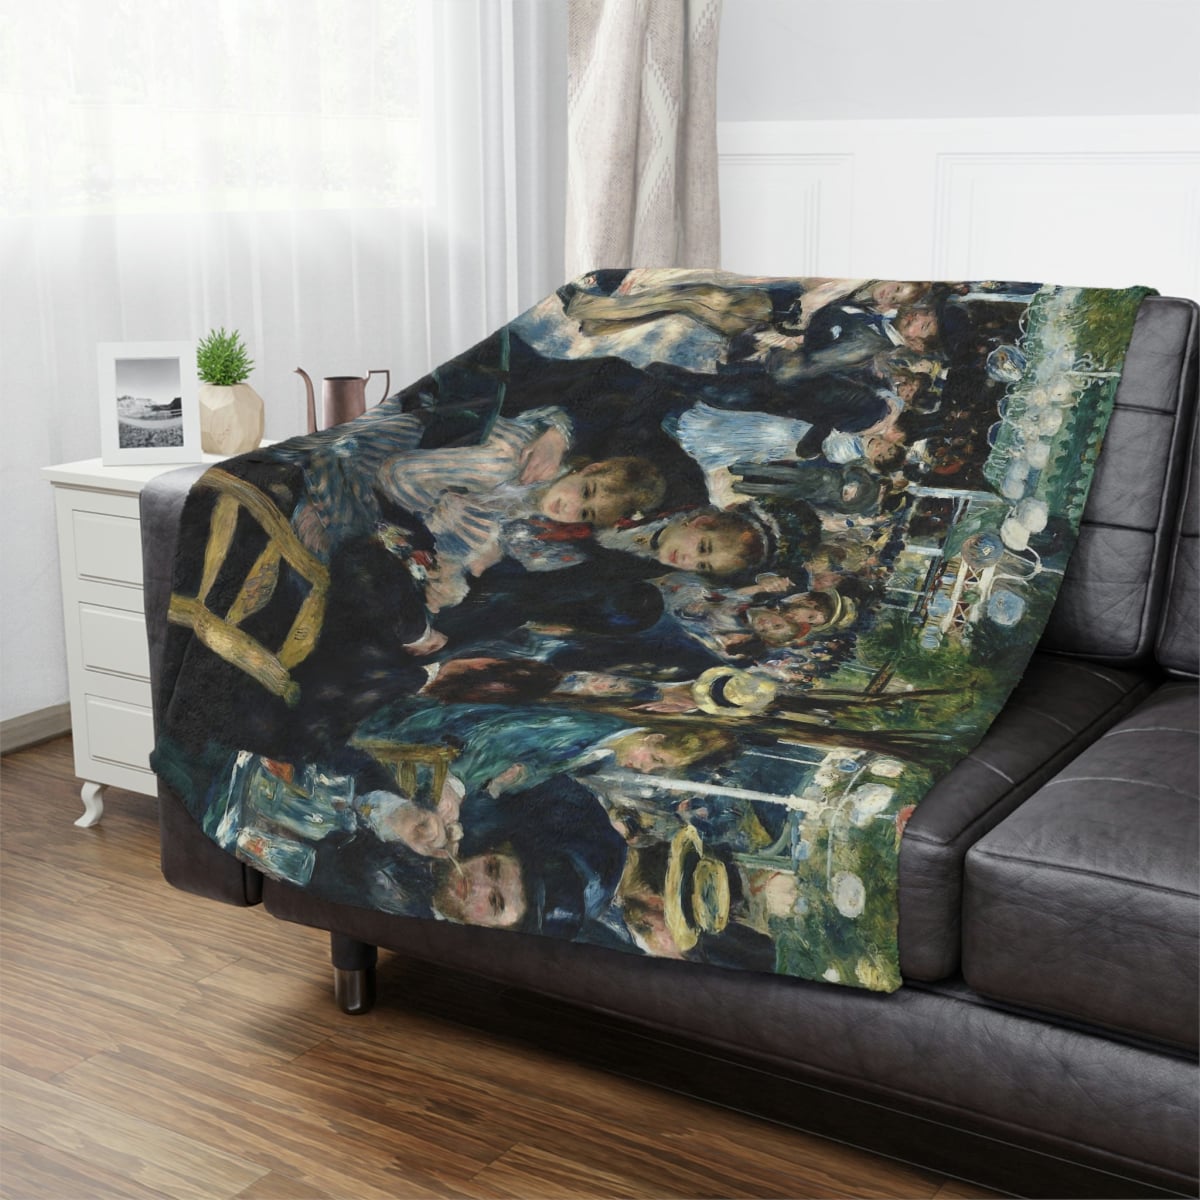 Soft and elegant Auguste Renoir painting reproduction on a cozy blanket